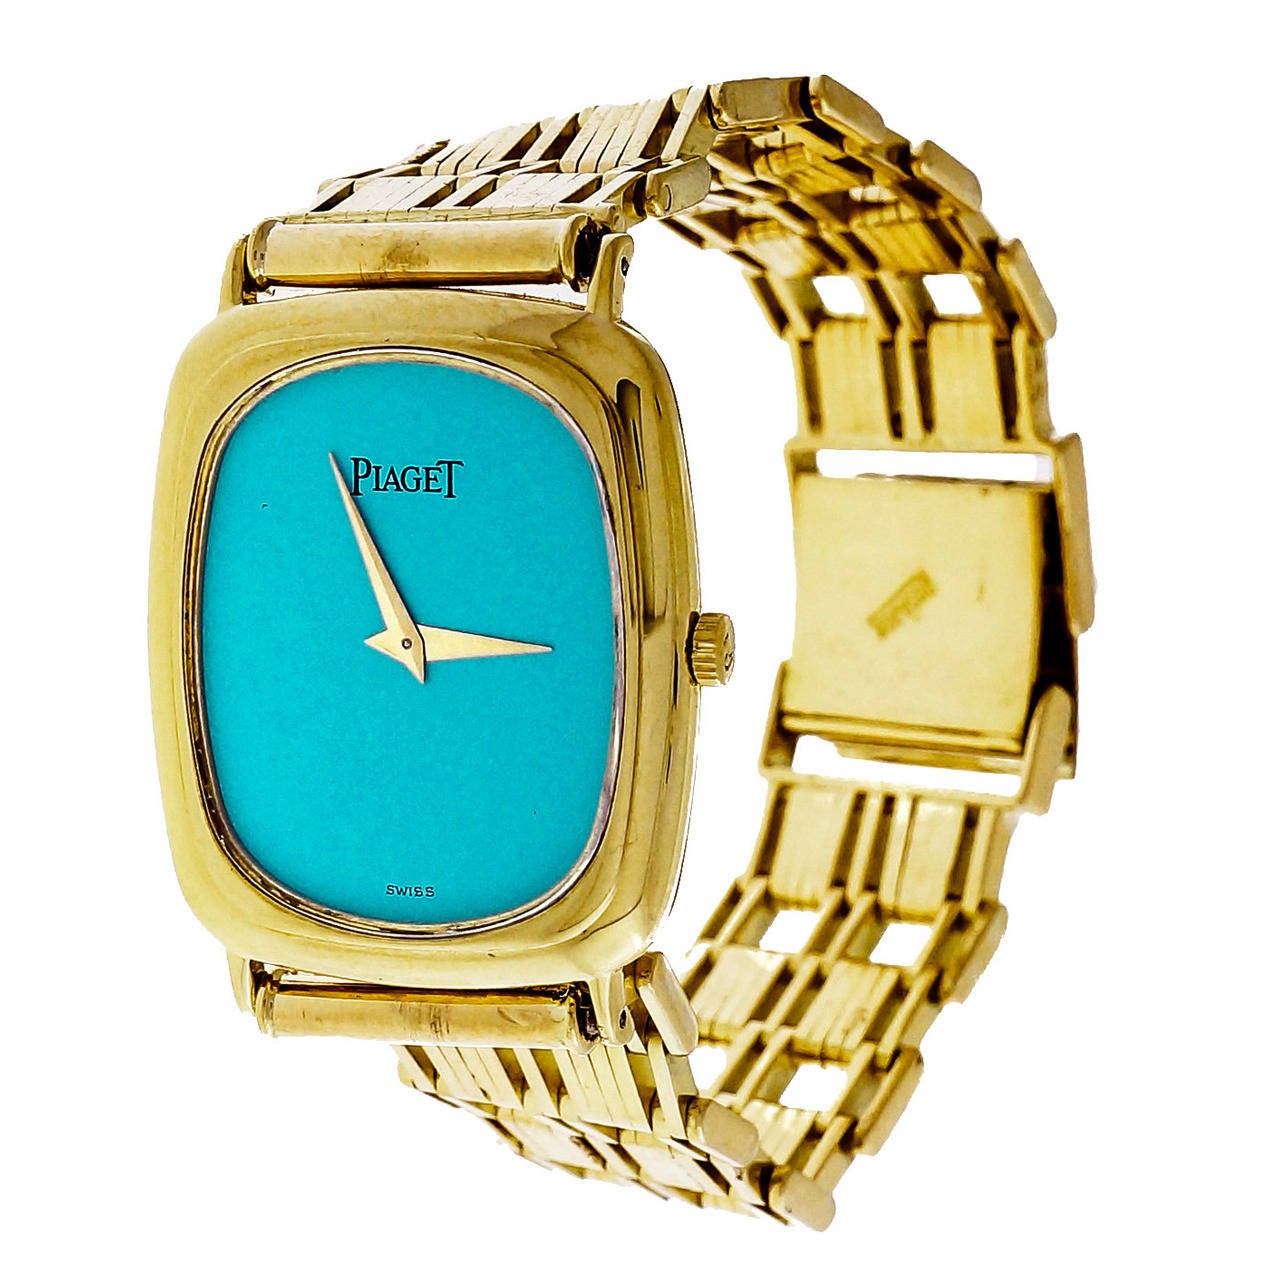 Piaget Lady's Yellow Gold Wristwatch With Custom-Colored Dial